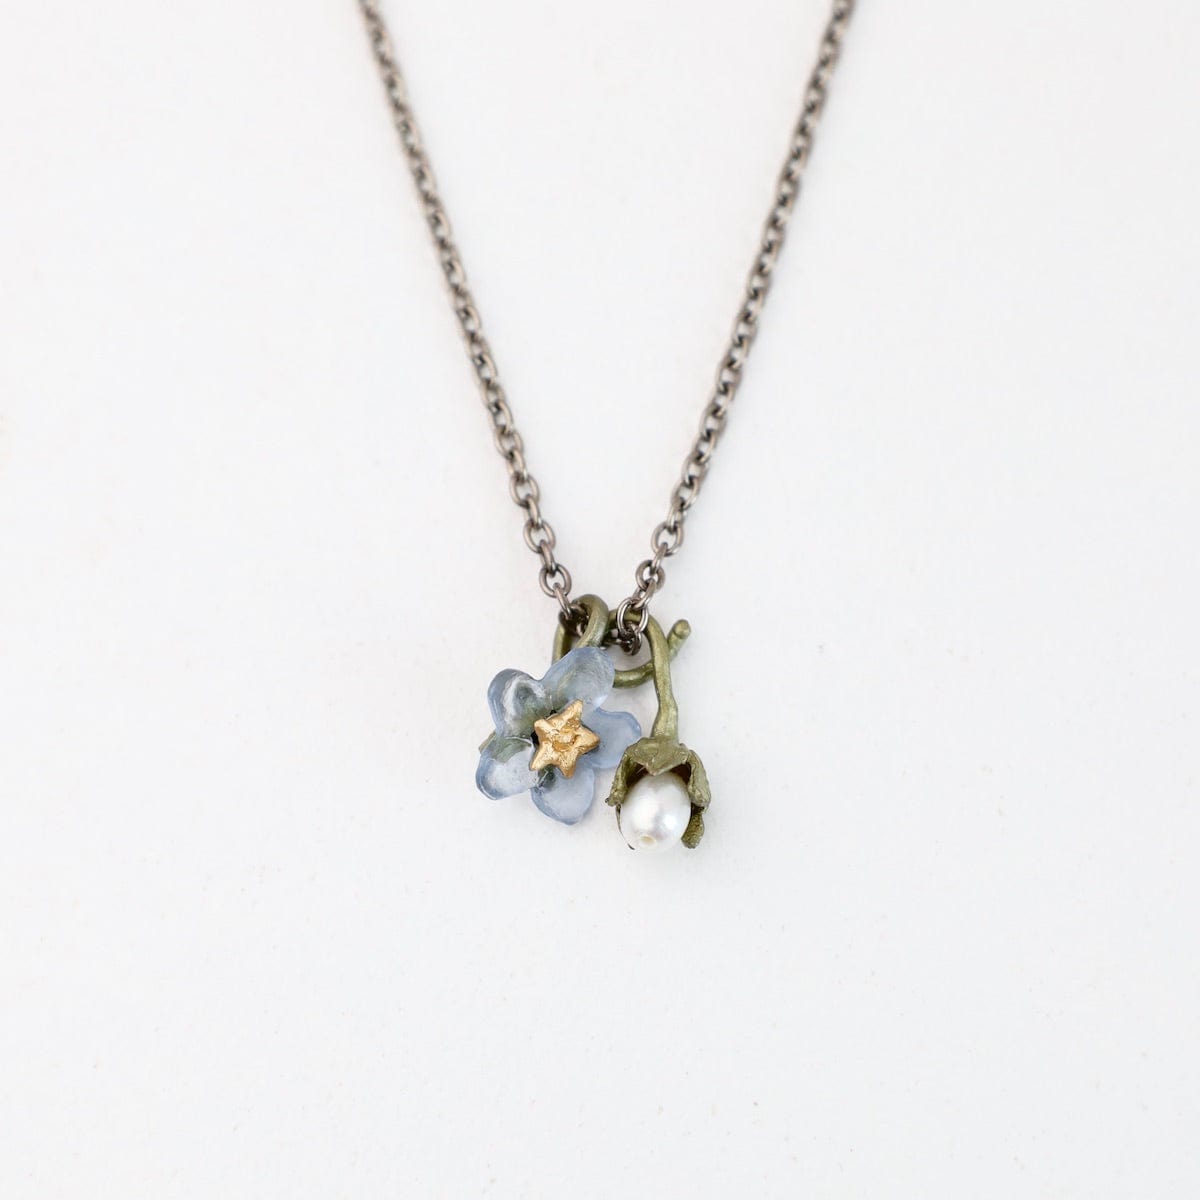 NKL Forget Me Not Pendant